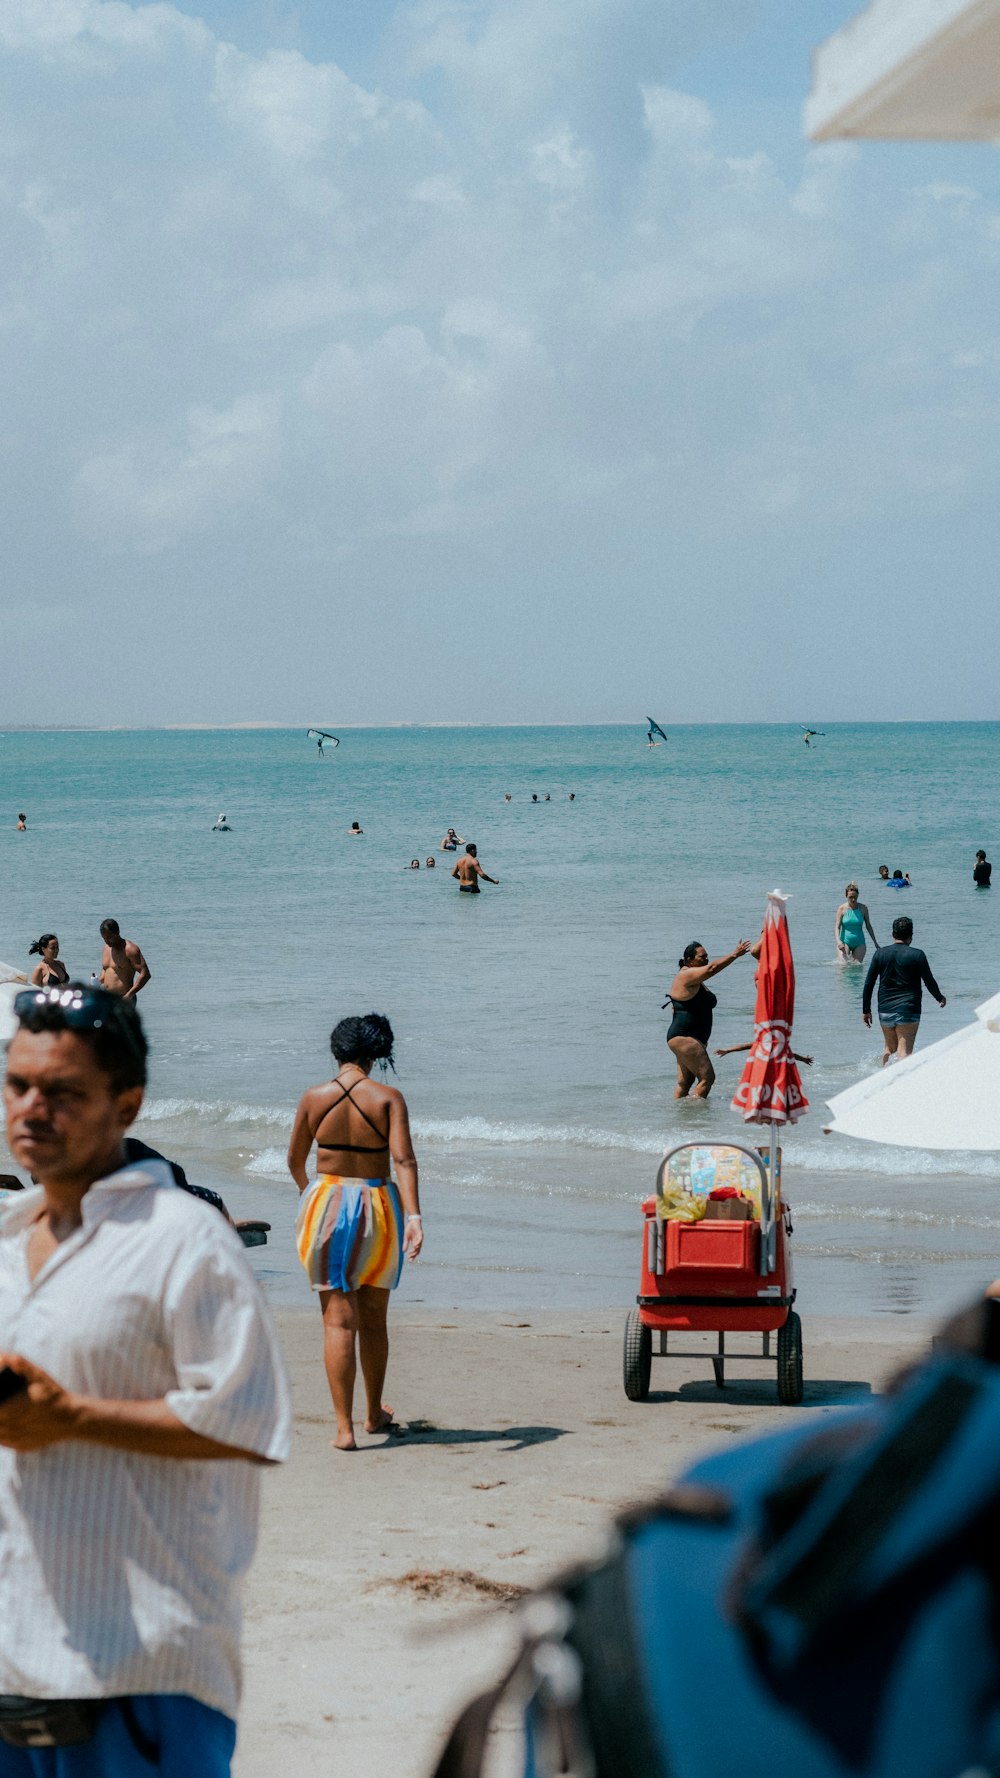 a crowded beach with people walking and swimming